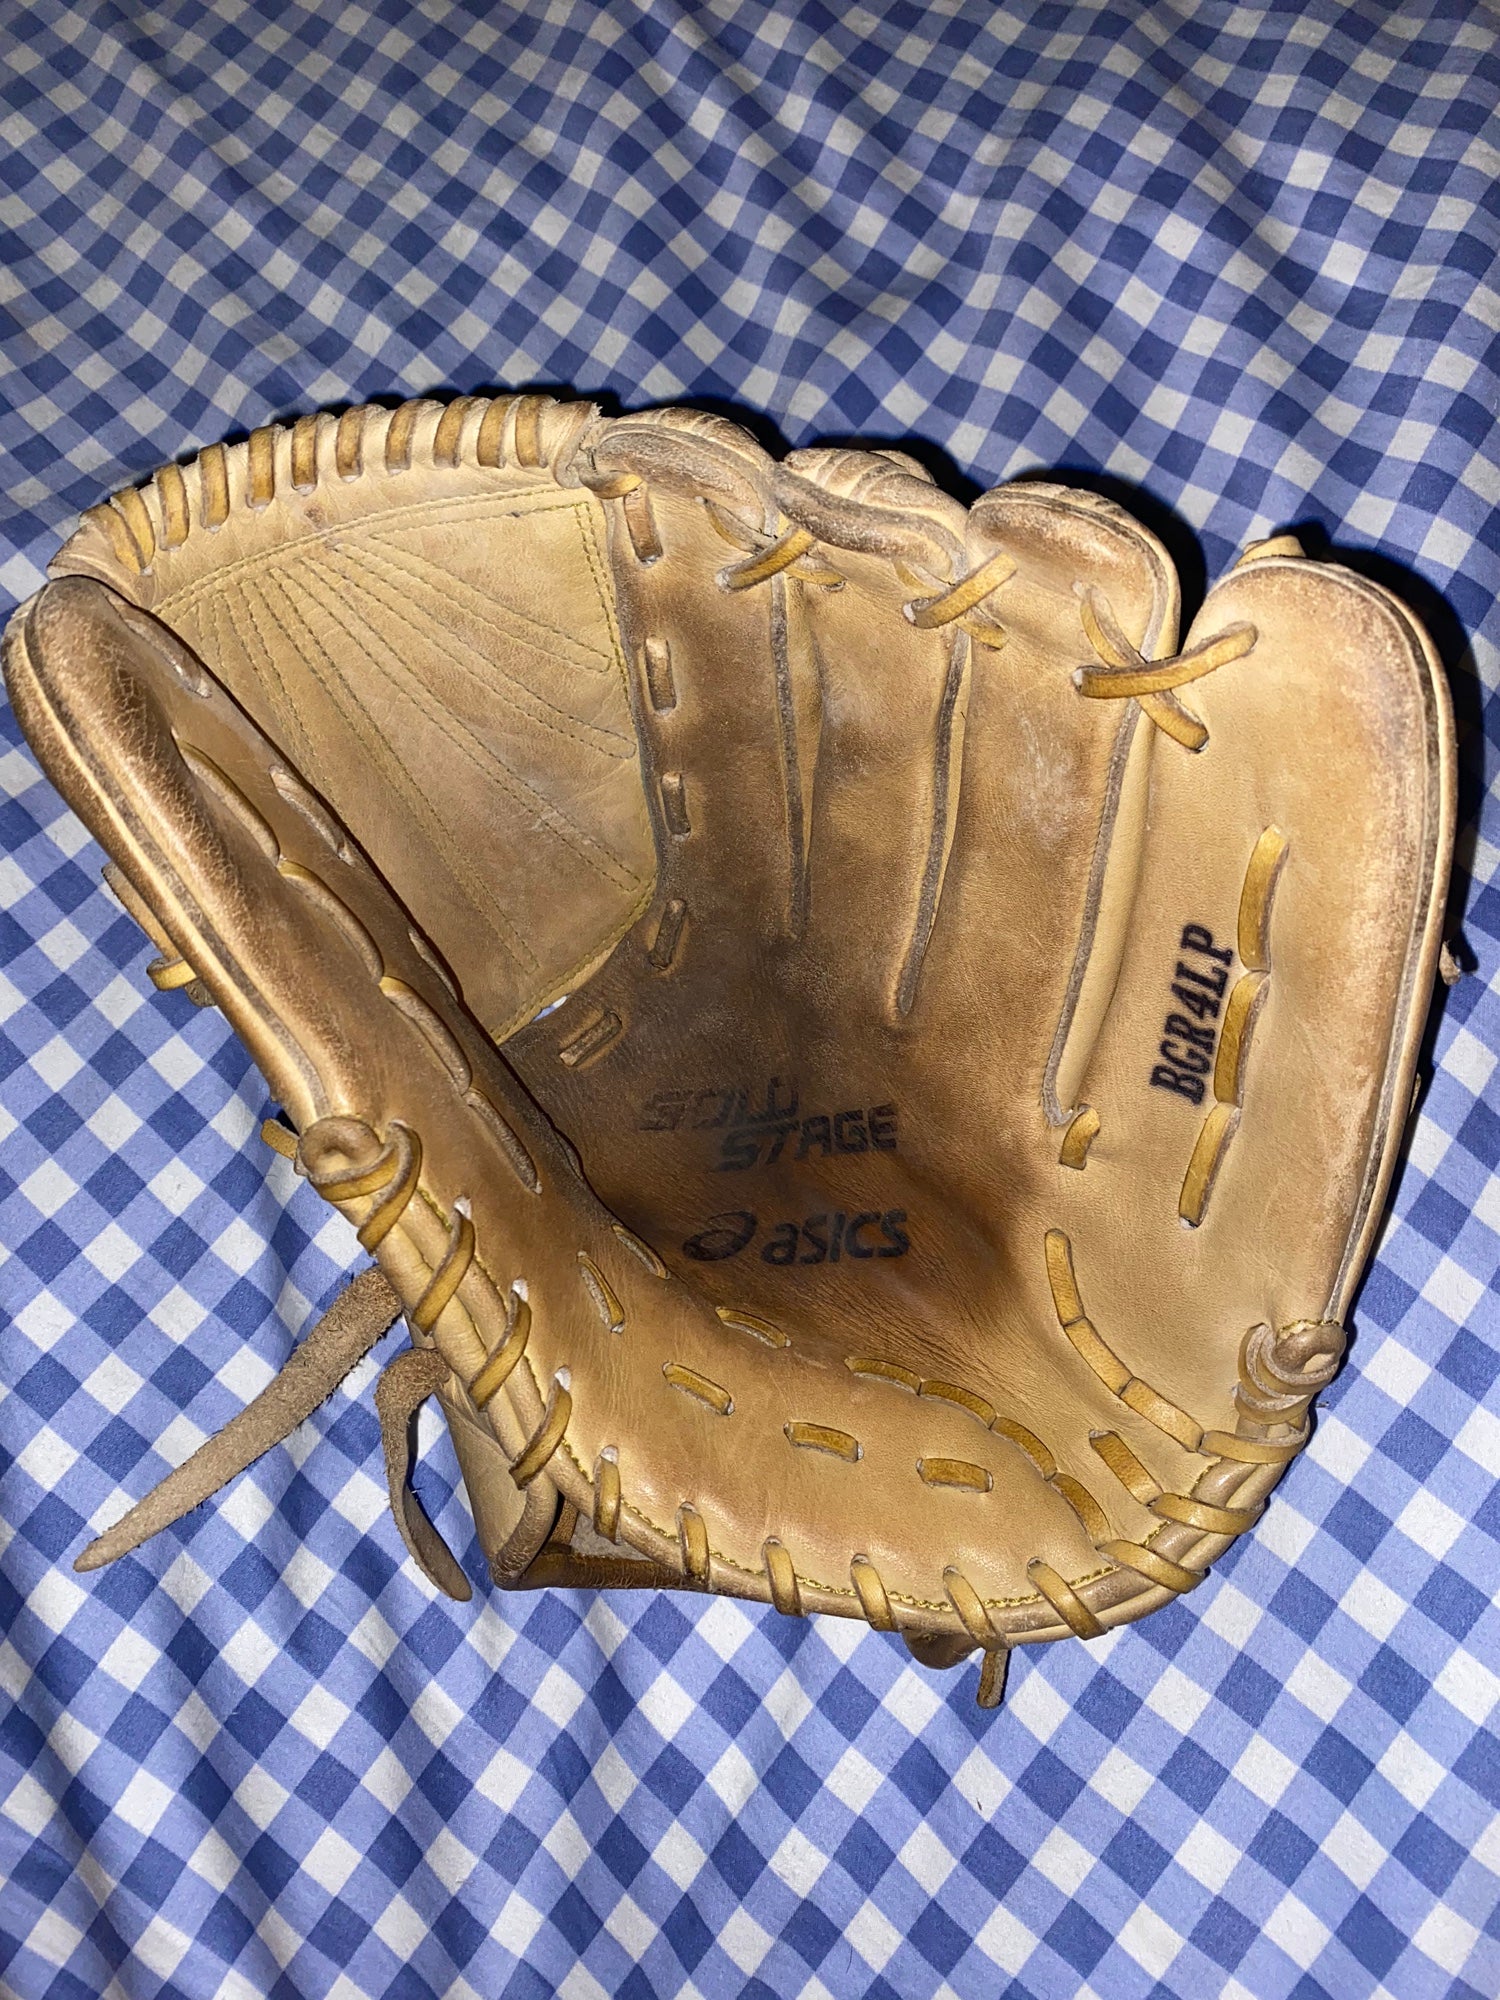 asics baseball hardball glove gold stage for i-Pro pitcher From